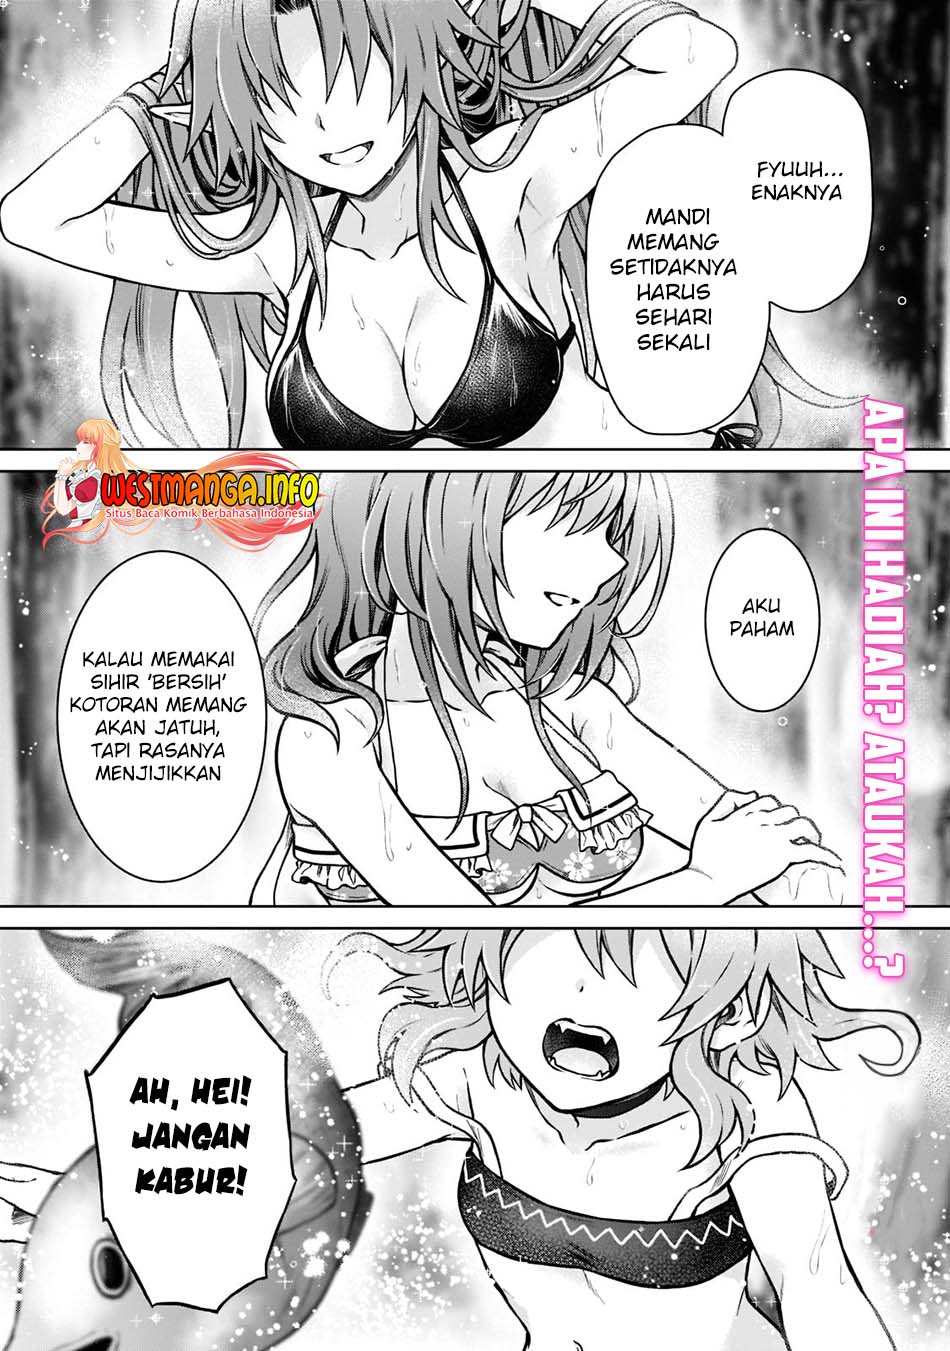 Dilarang COPAS - situs resmi www.mangacanblog.com - Komik d rank adventurer invited by a brave party and the stalking princess 008 - chapter 8 9 Indonesia d rank adventurer invited by a brave party and the stalking princess 008 - chapter 8 Terbaru 3|Baca Manga Komik Indonesia|Mangacan